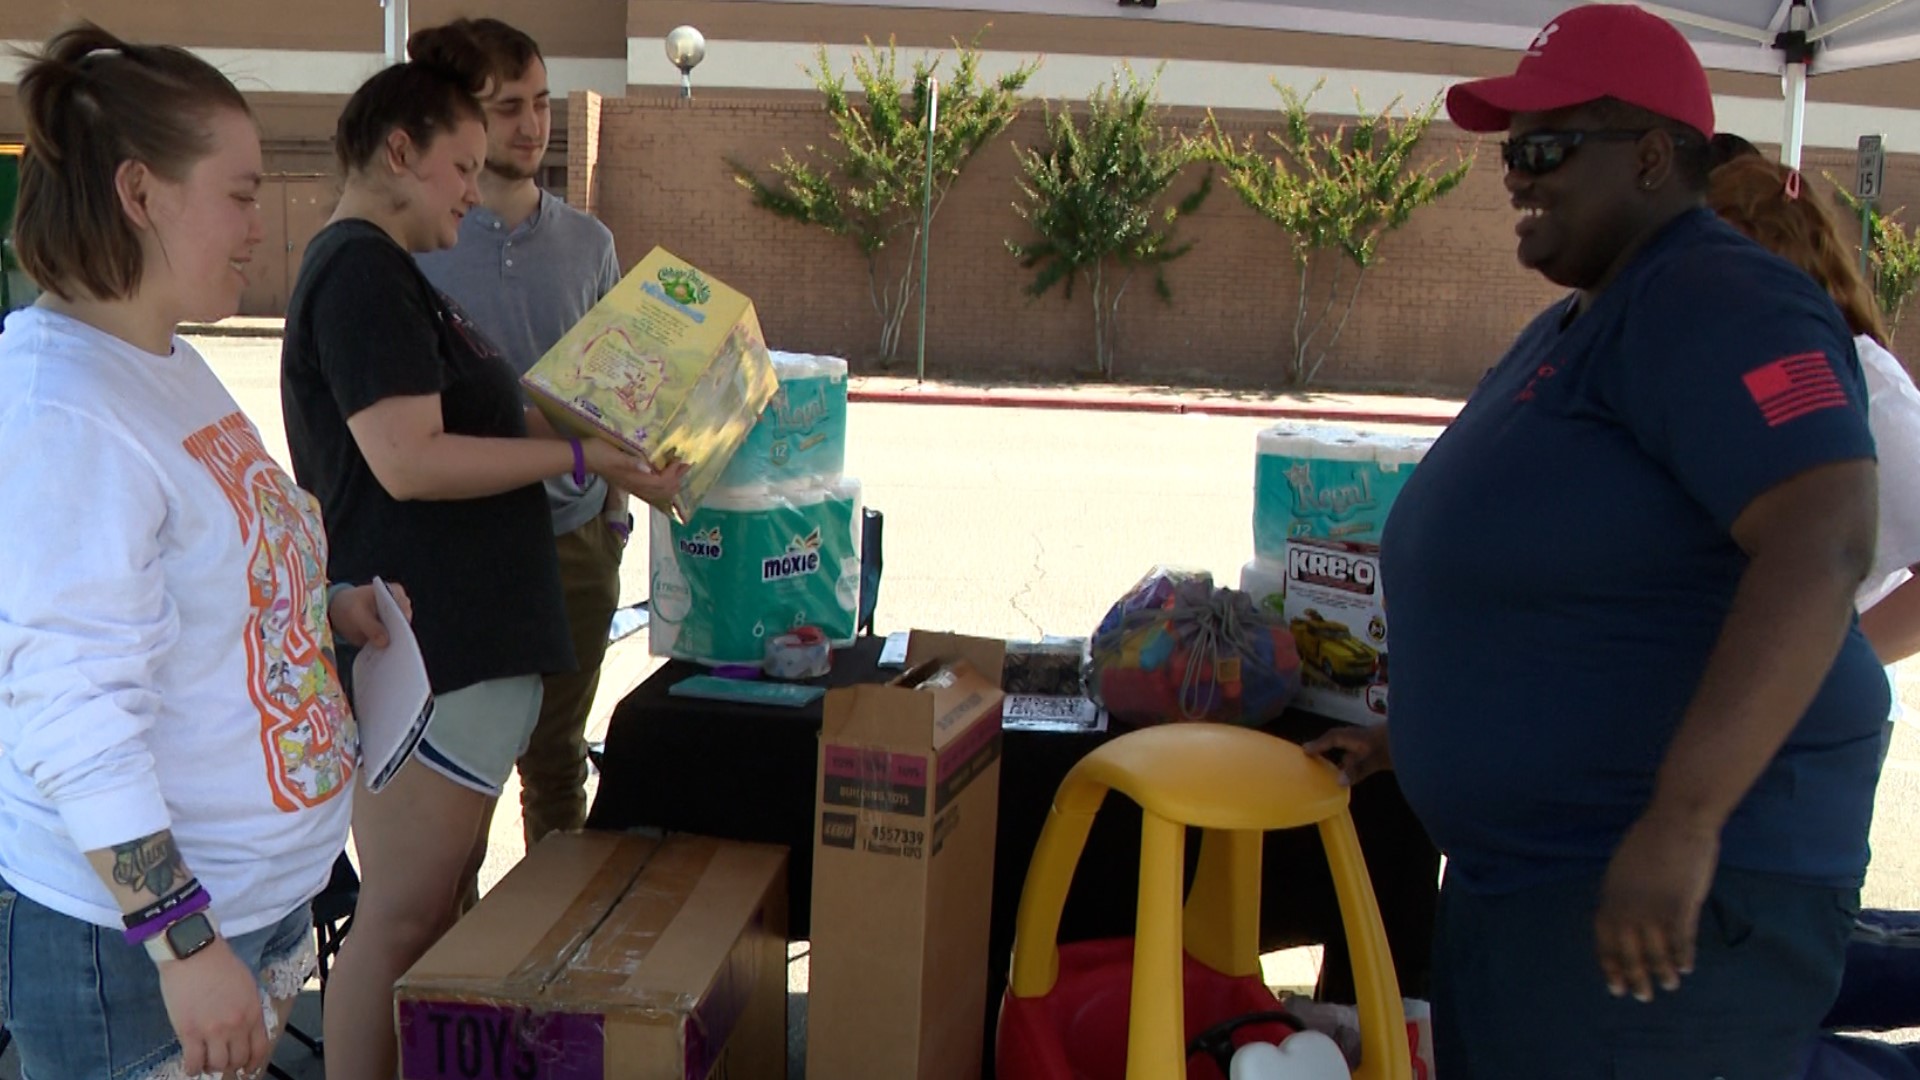 A donation drive was held on Saturday in benefit of Women's & Children's First, an organization that provides resources to domestic violence victims and their kids.